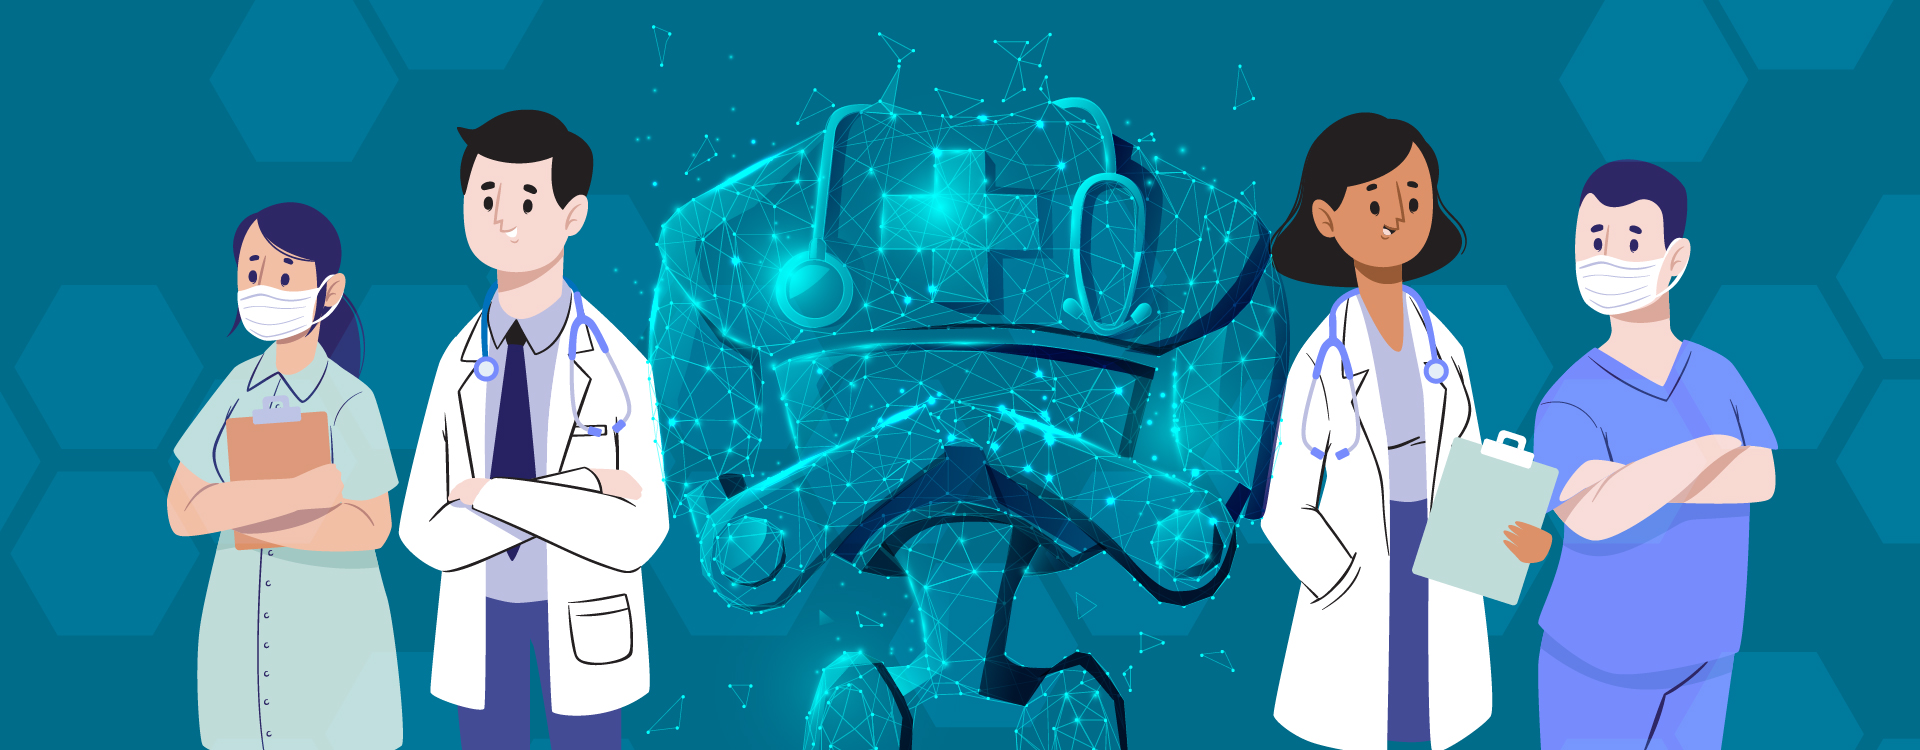 1mg is deploying AI to bring innovations in healthcare.